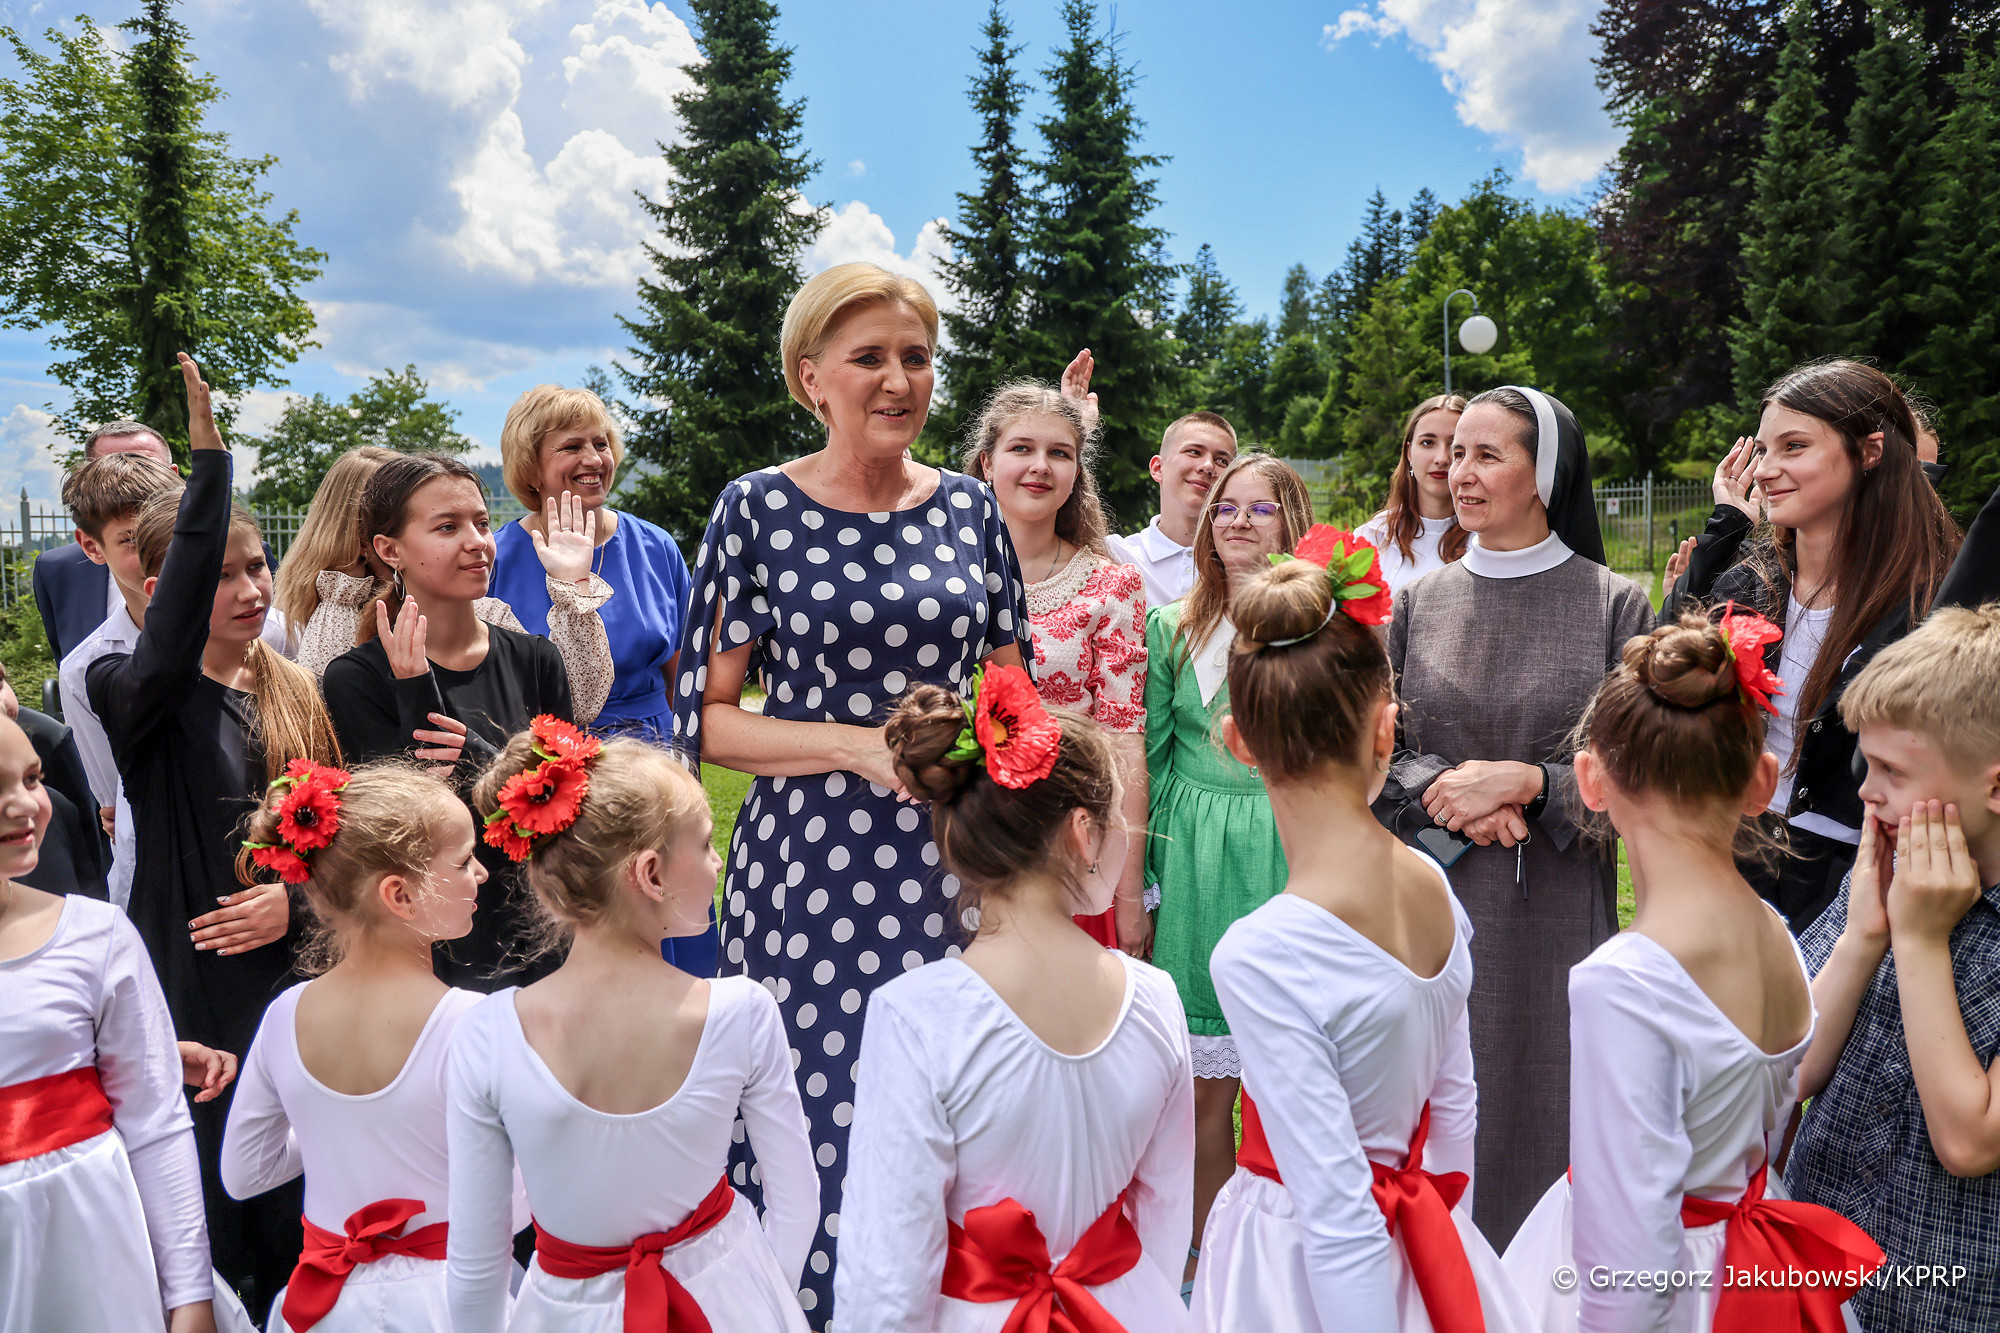 The First Lady of the Republic of Poland in a De Marco dress with the most fashionable print of the summer 2024 season!